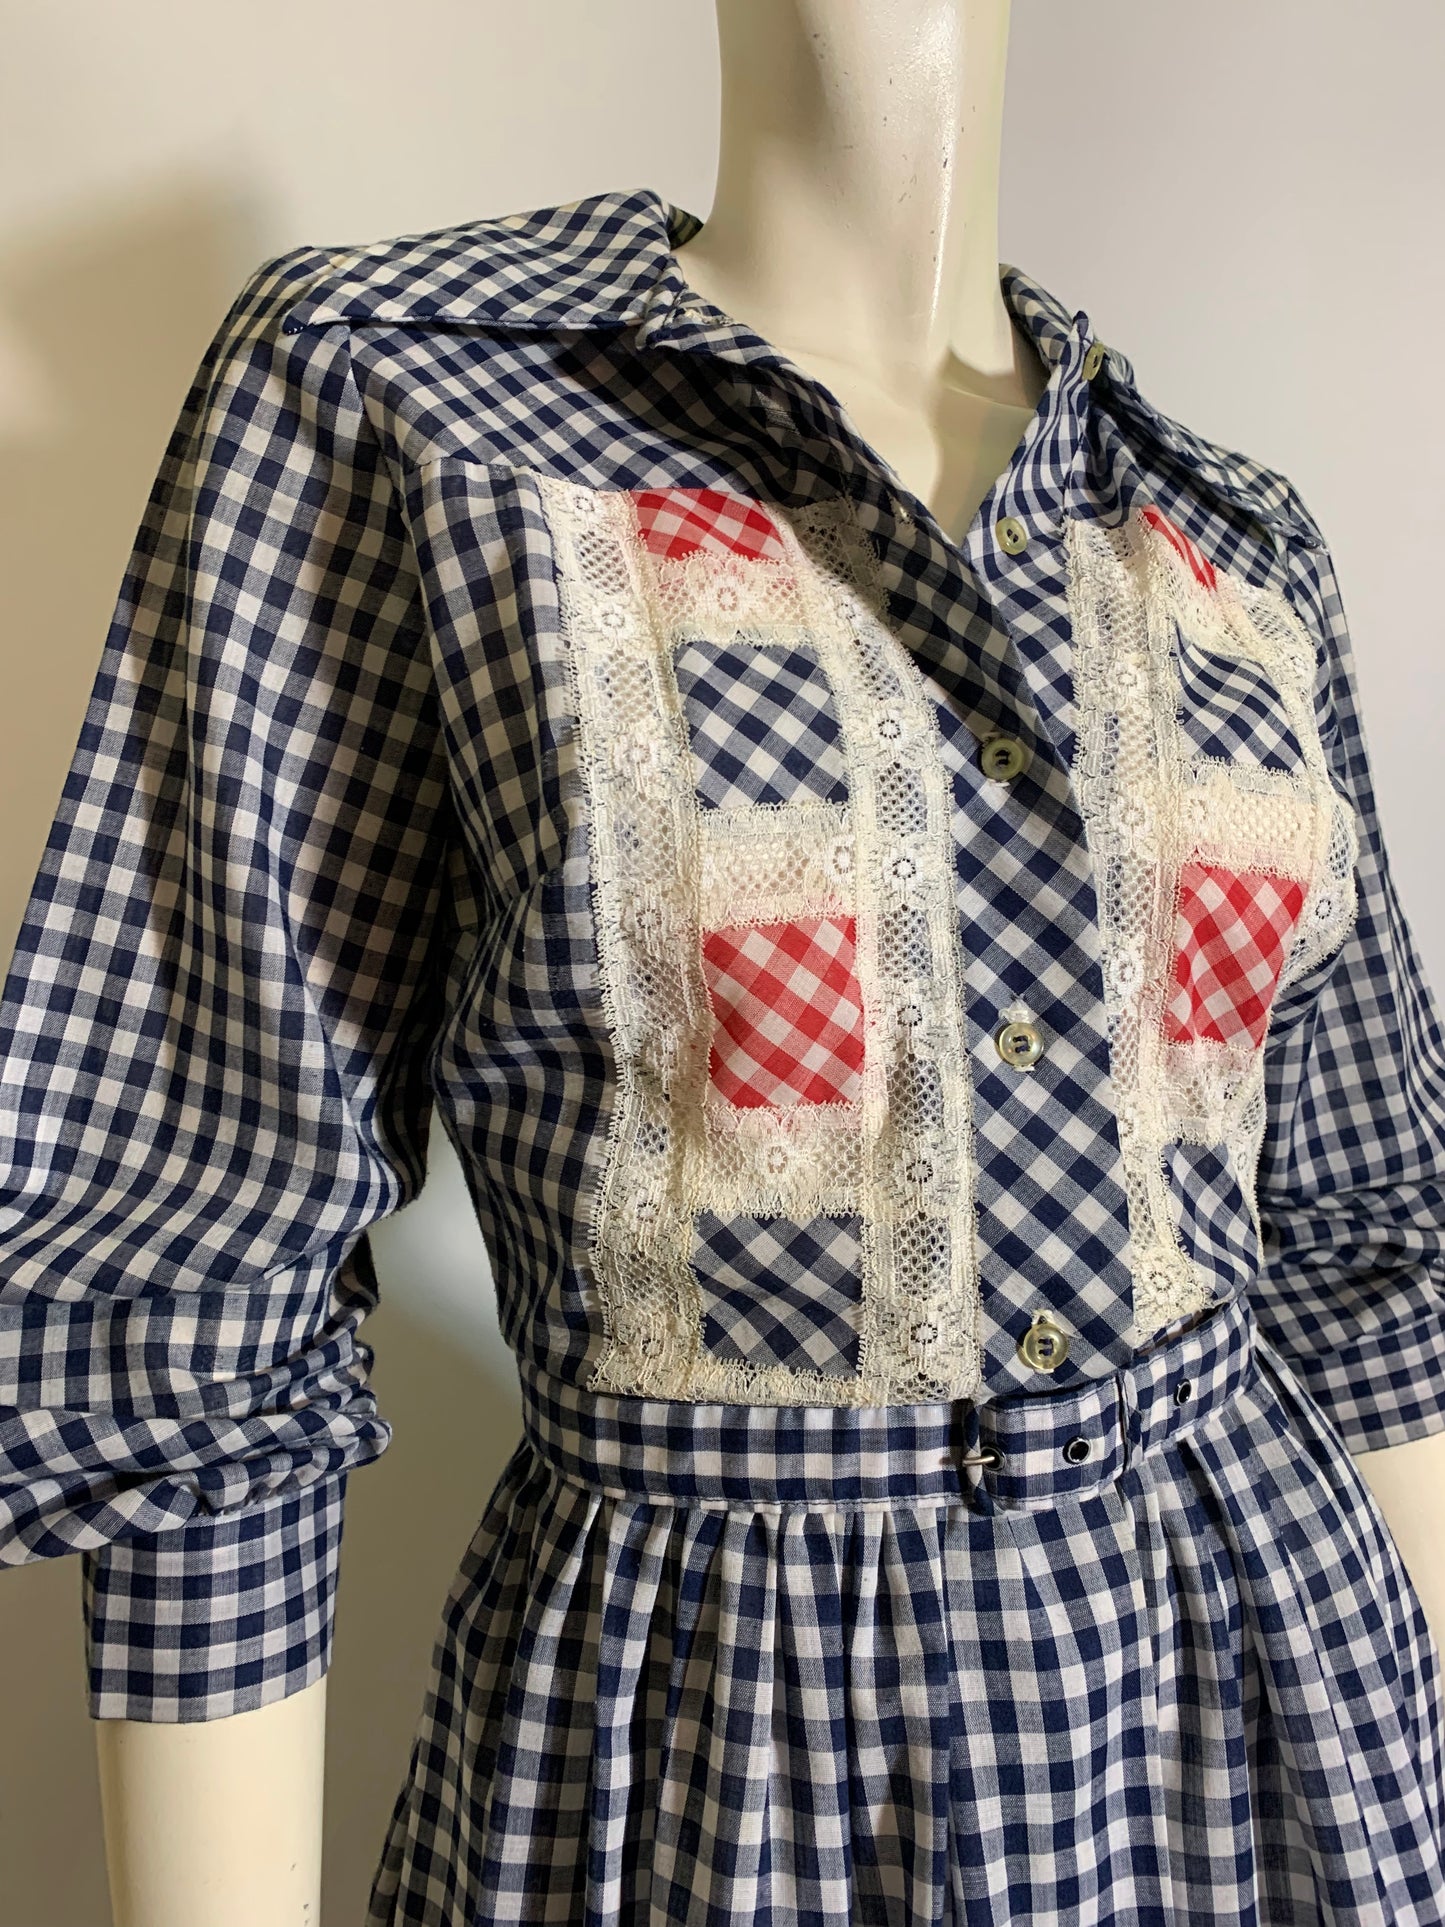 Blue and White Gingham Cotton Lace Trimmed Dress circa 1970s